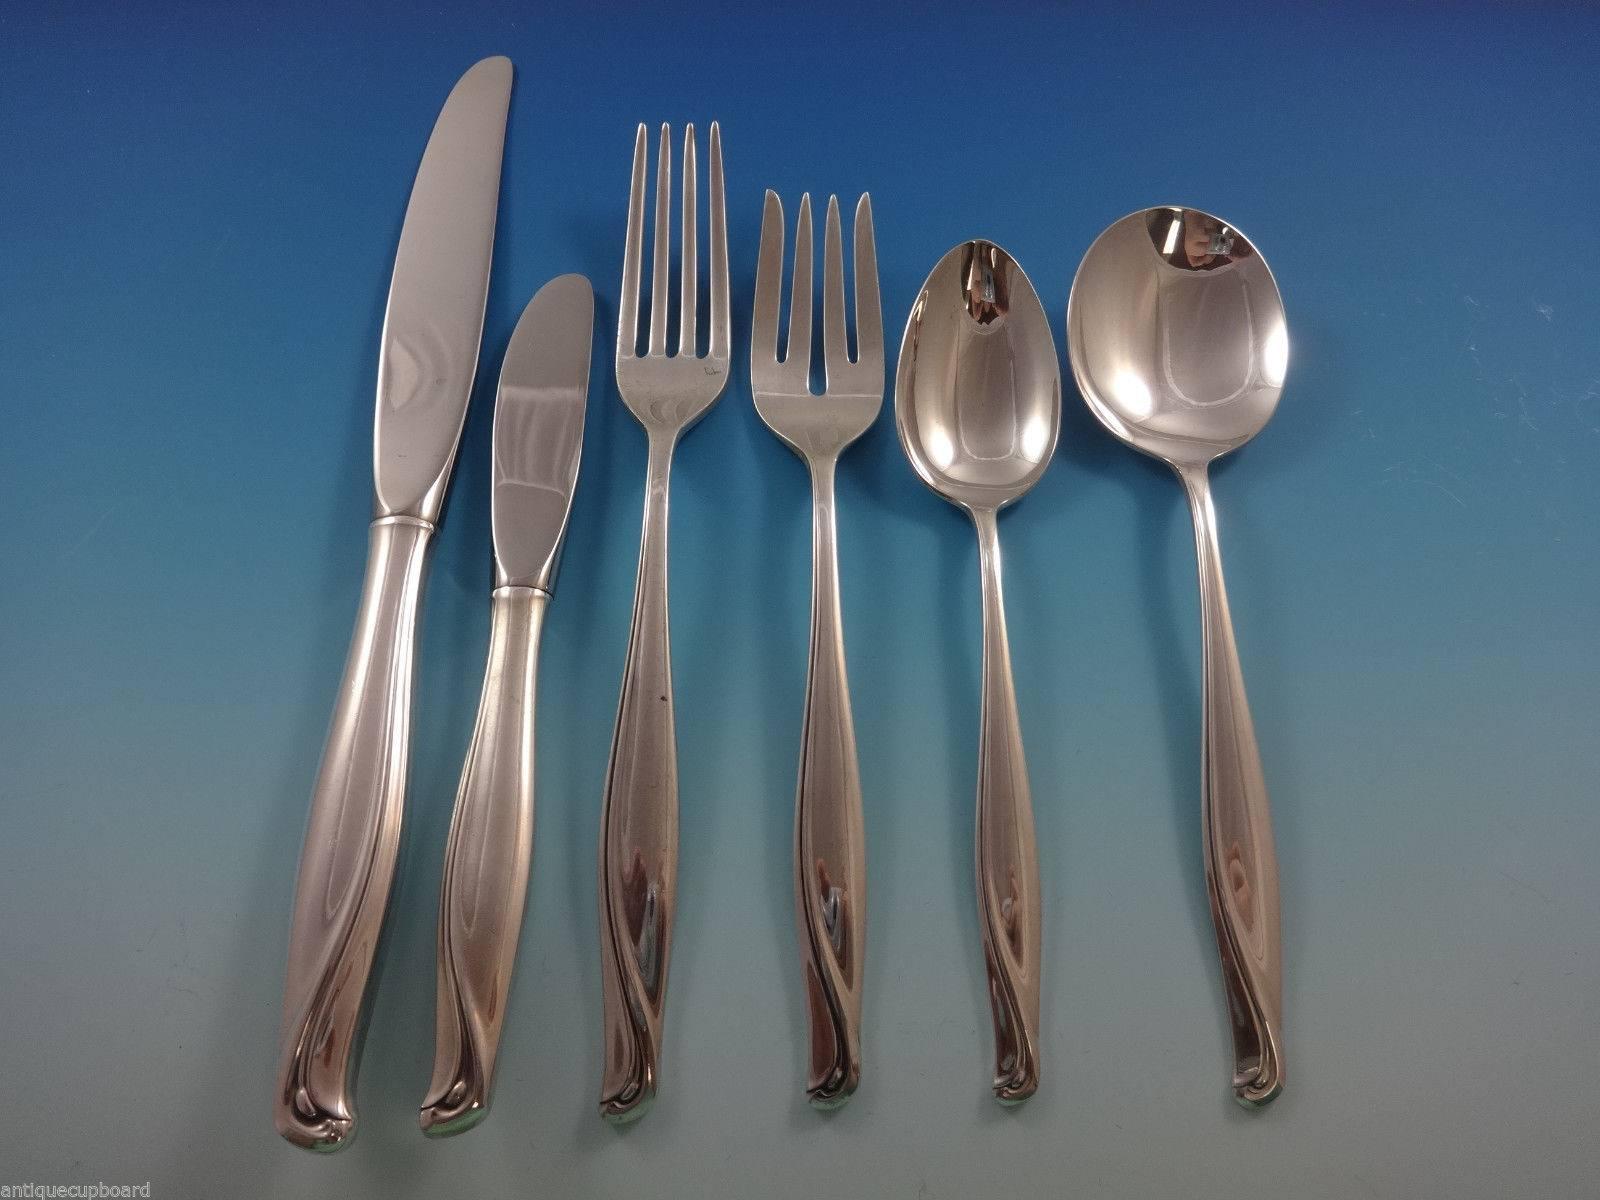 Stunning Mid-Century Modern spring bud by Alvin sterling silver flatware set of 51 pieces. This set includes:

Eight knives, 9